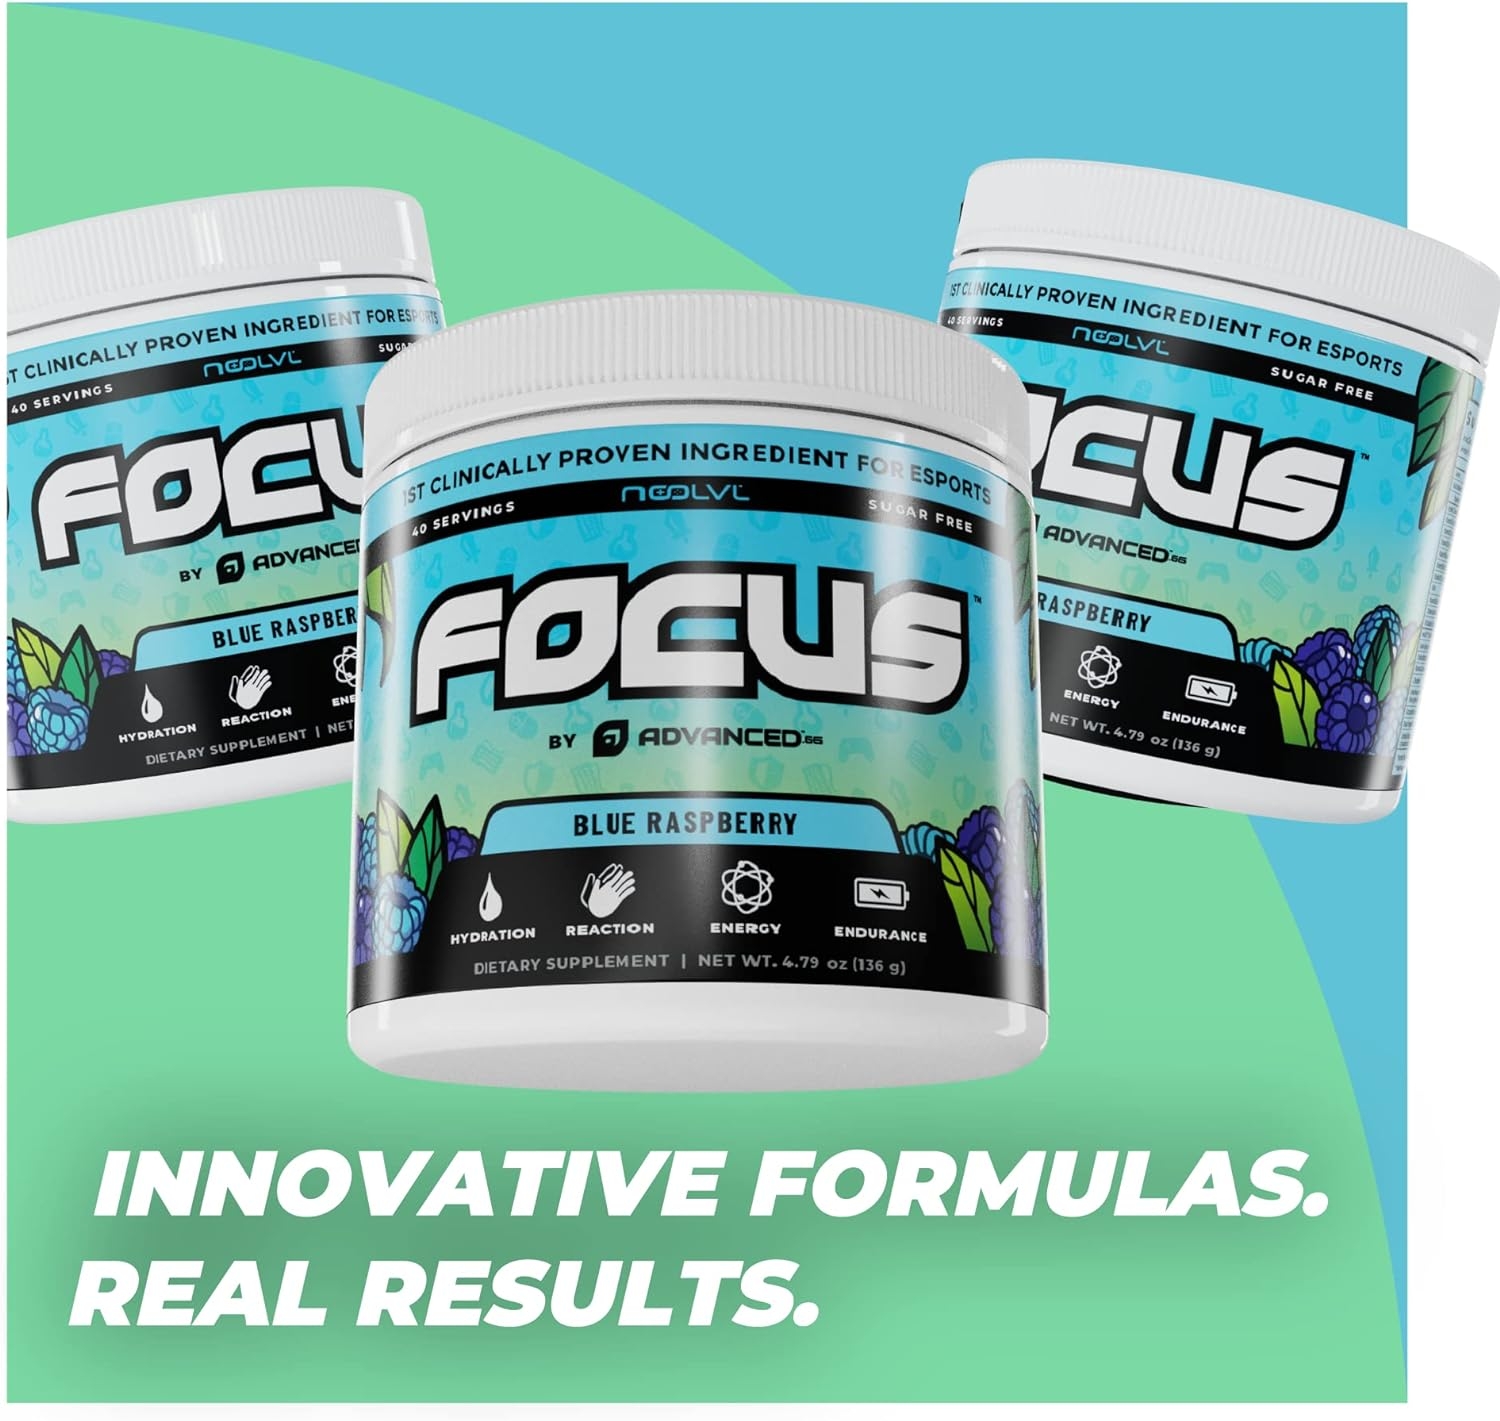 Focus by ADVANCED | Focus and Concentration Formula with NooLVL | Mental Clarity & Energy Boost for Gaming, Work & Study | Sugar Free & Keto Friendly | (40 Servings) (Blue Raspberry)